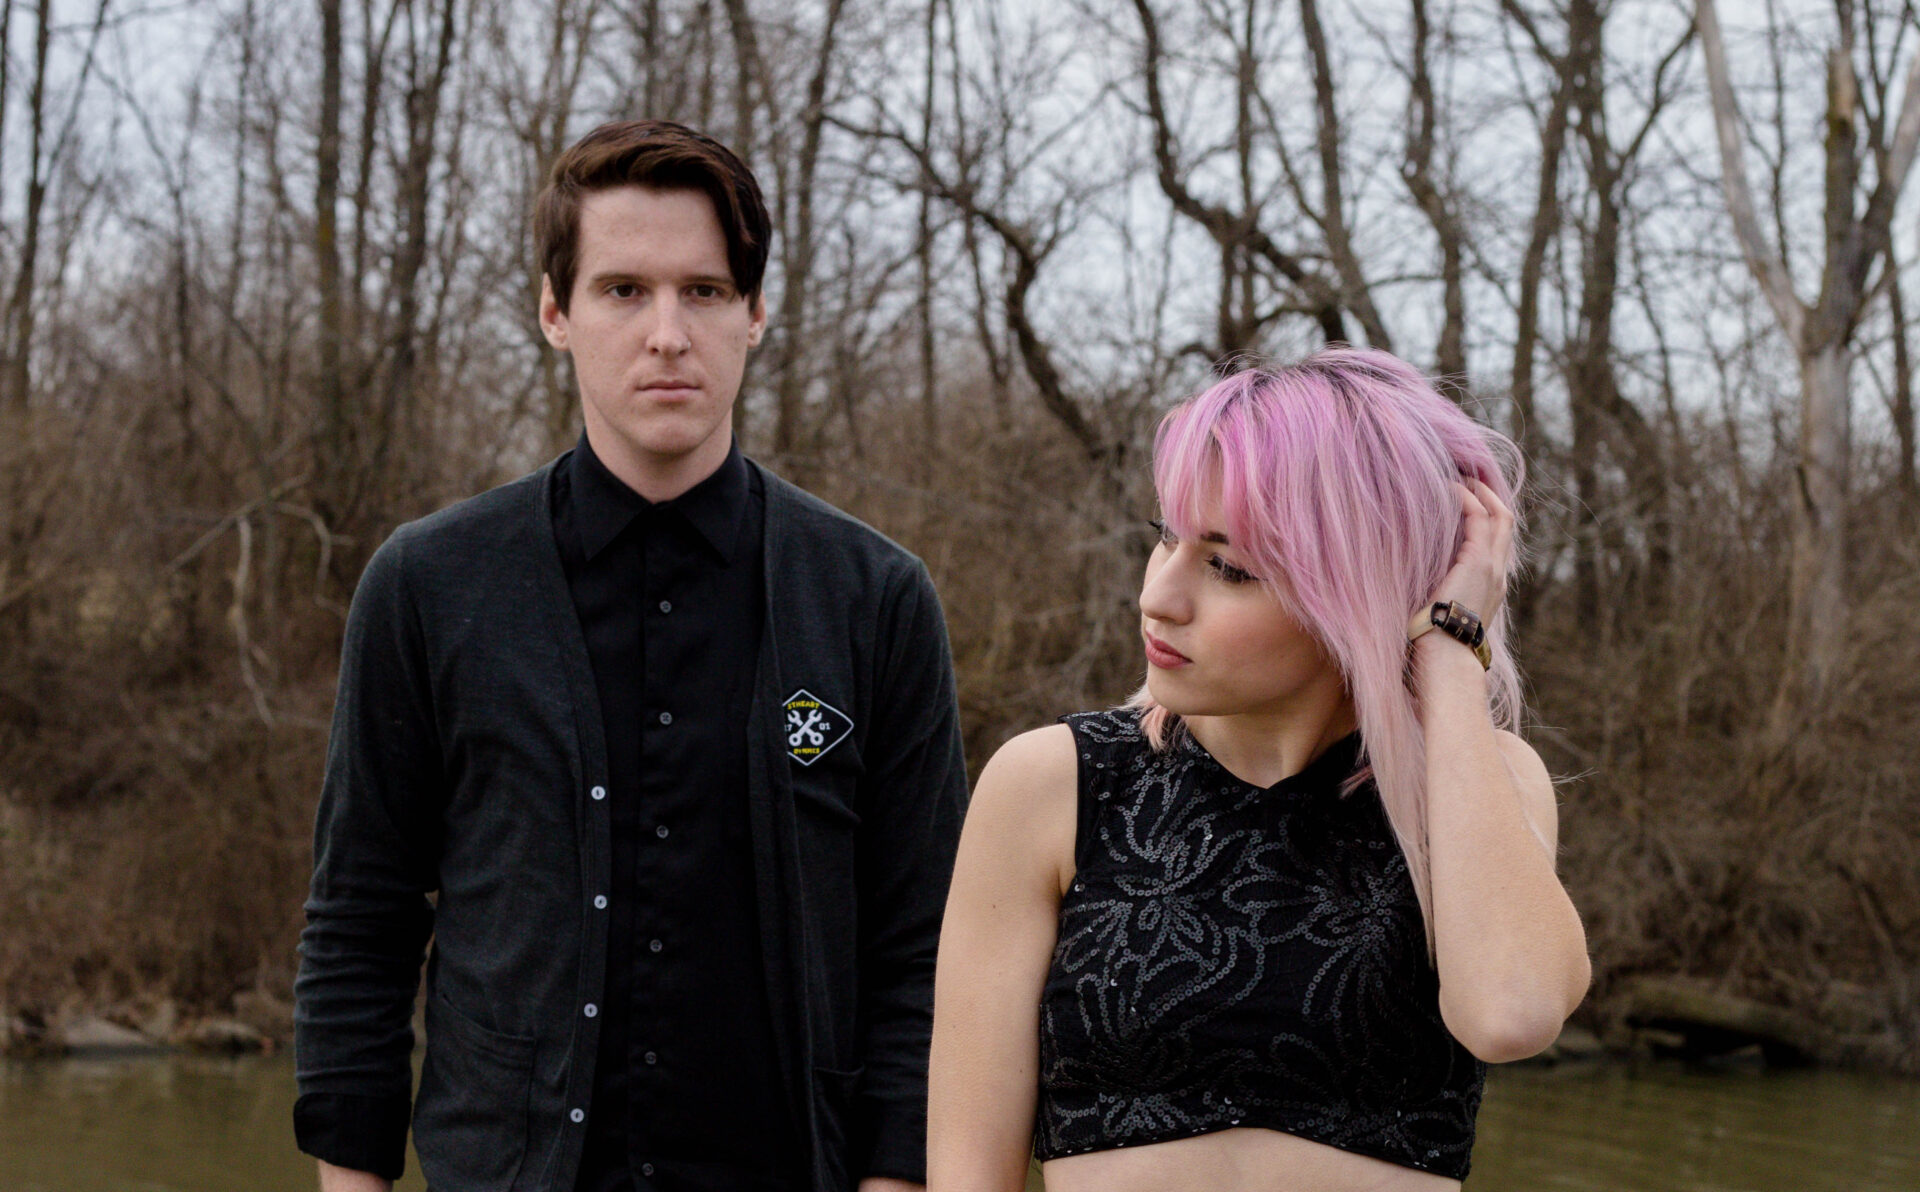 PREMIERE: Ashland manage a noxious love addiction in video for “No Good”